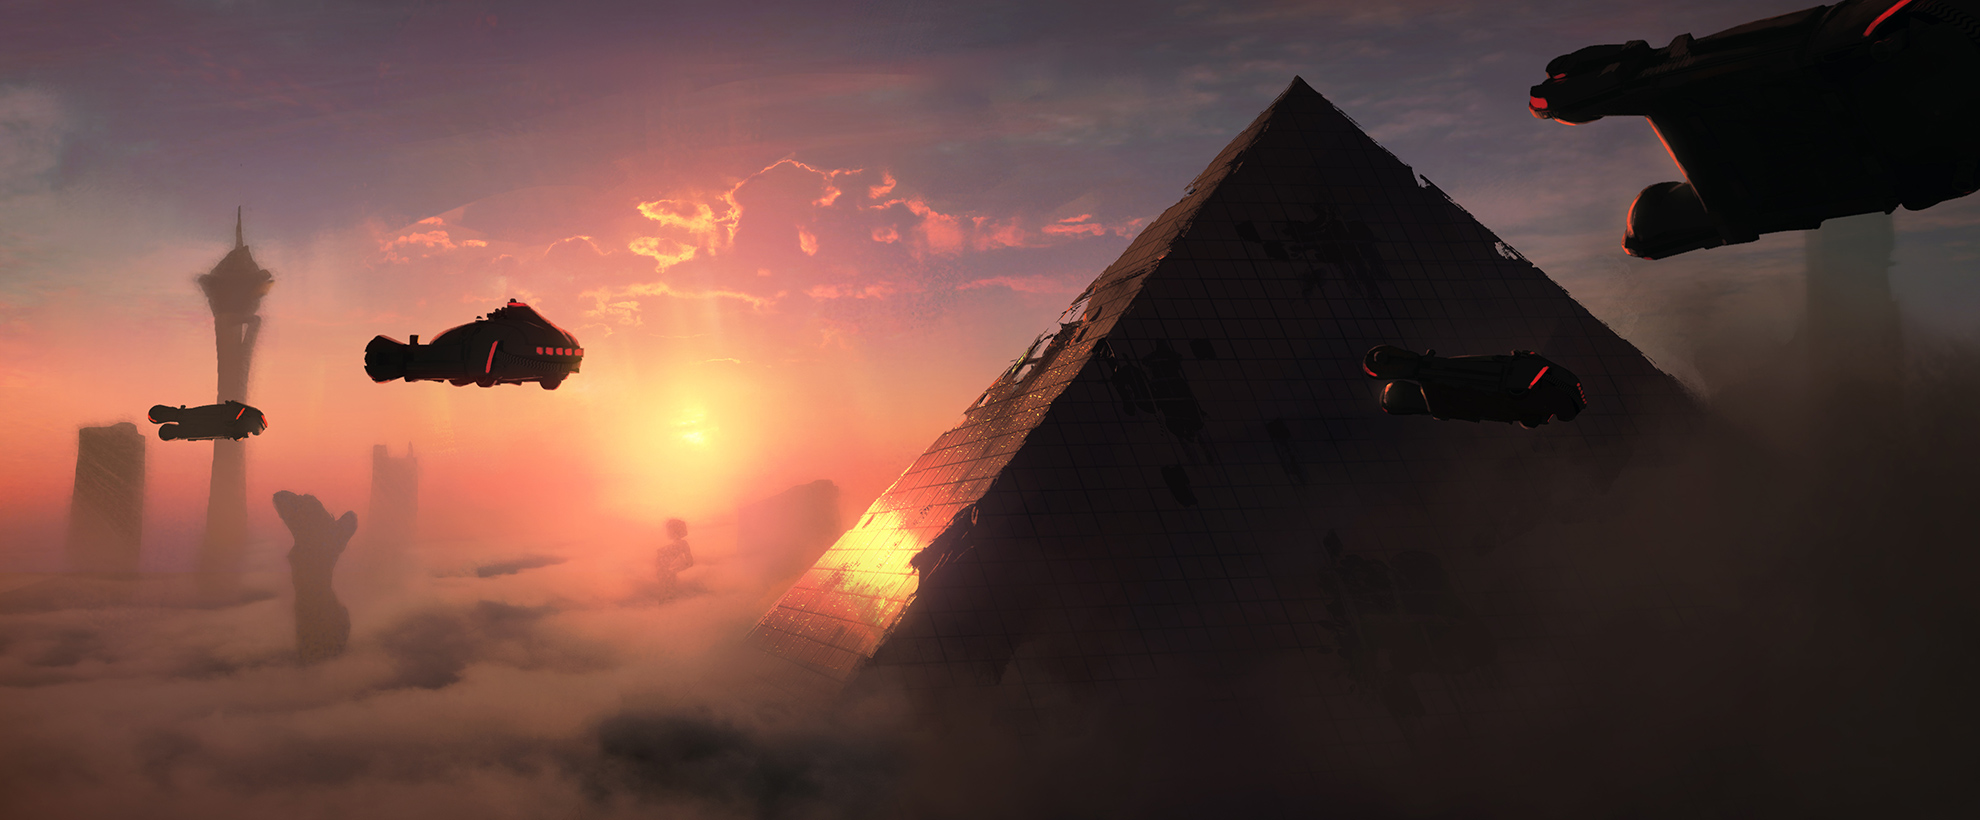 Concept Art for Blade Runner 2049, futuristic pyramids at sunset, surrounded by spaceships